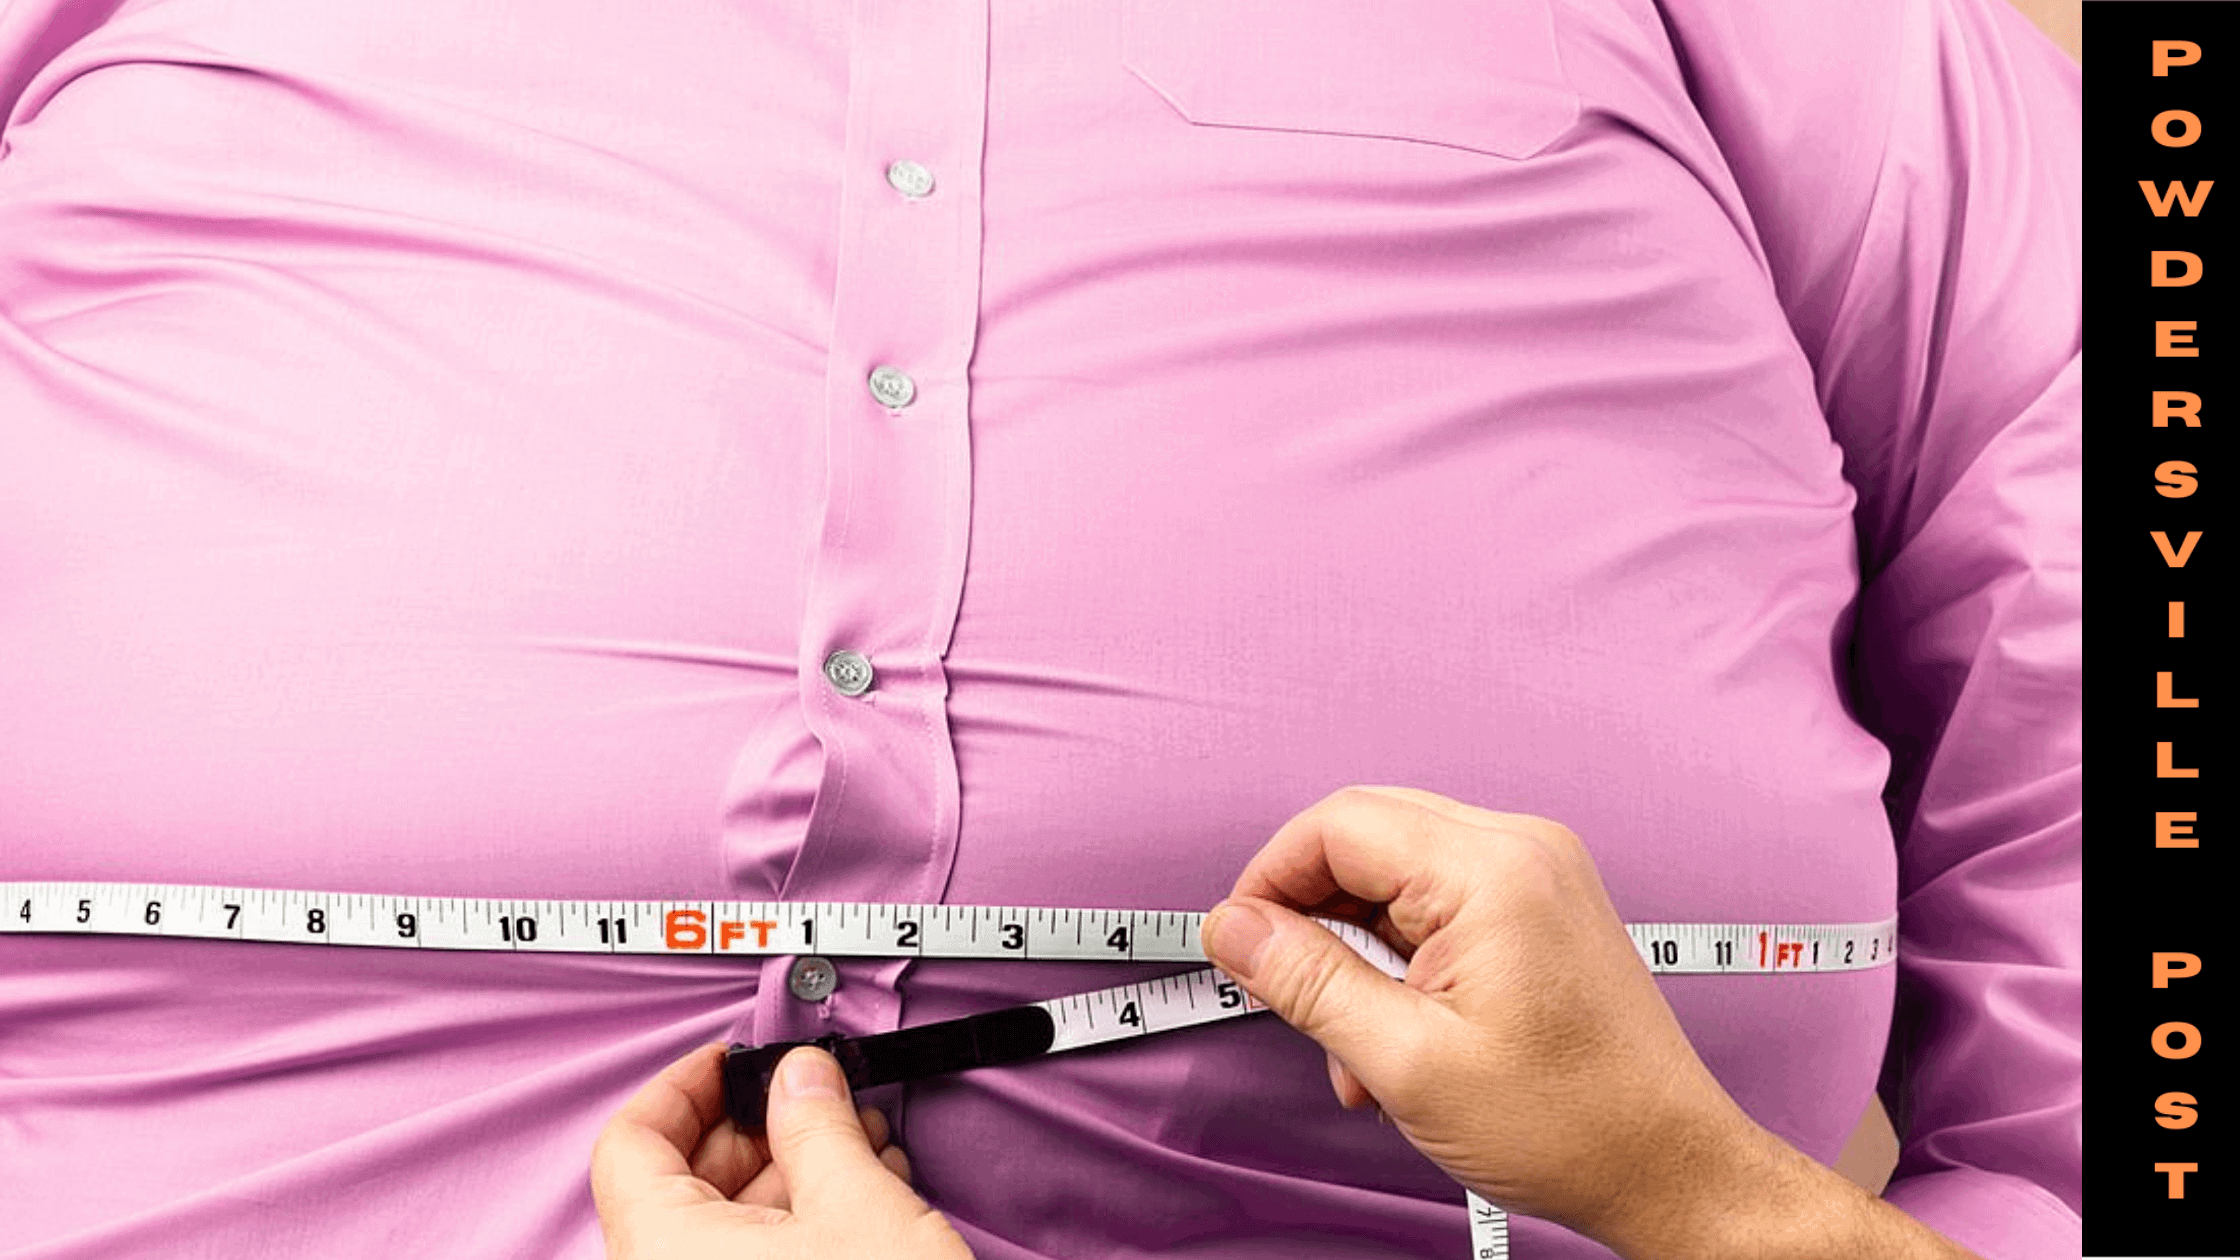 The Semaglutide Injection For Weight Loss-Is It Safe